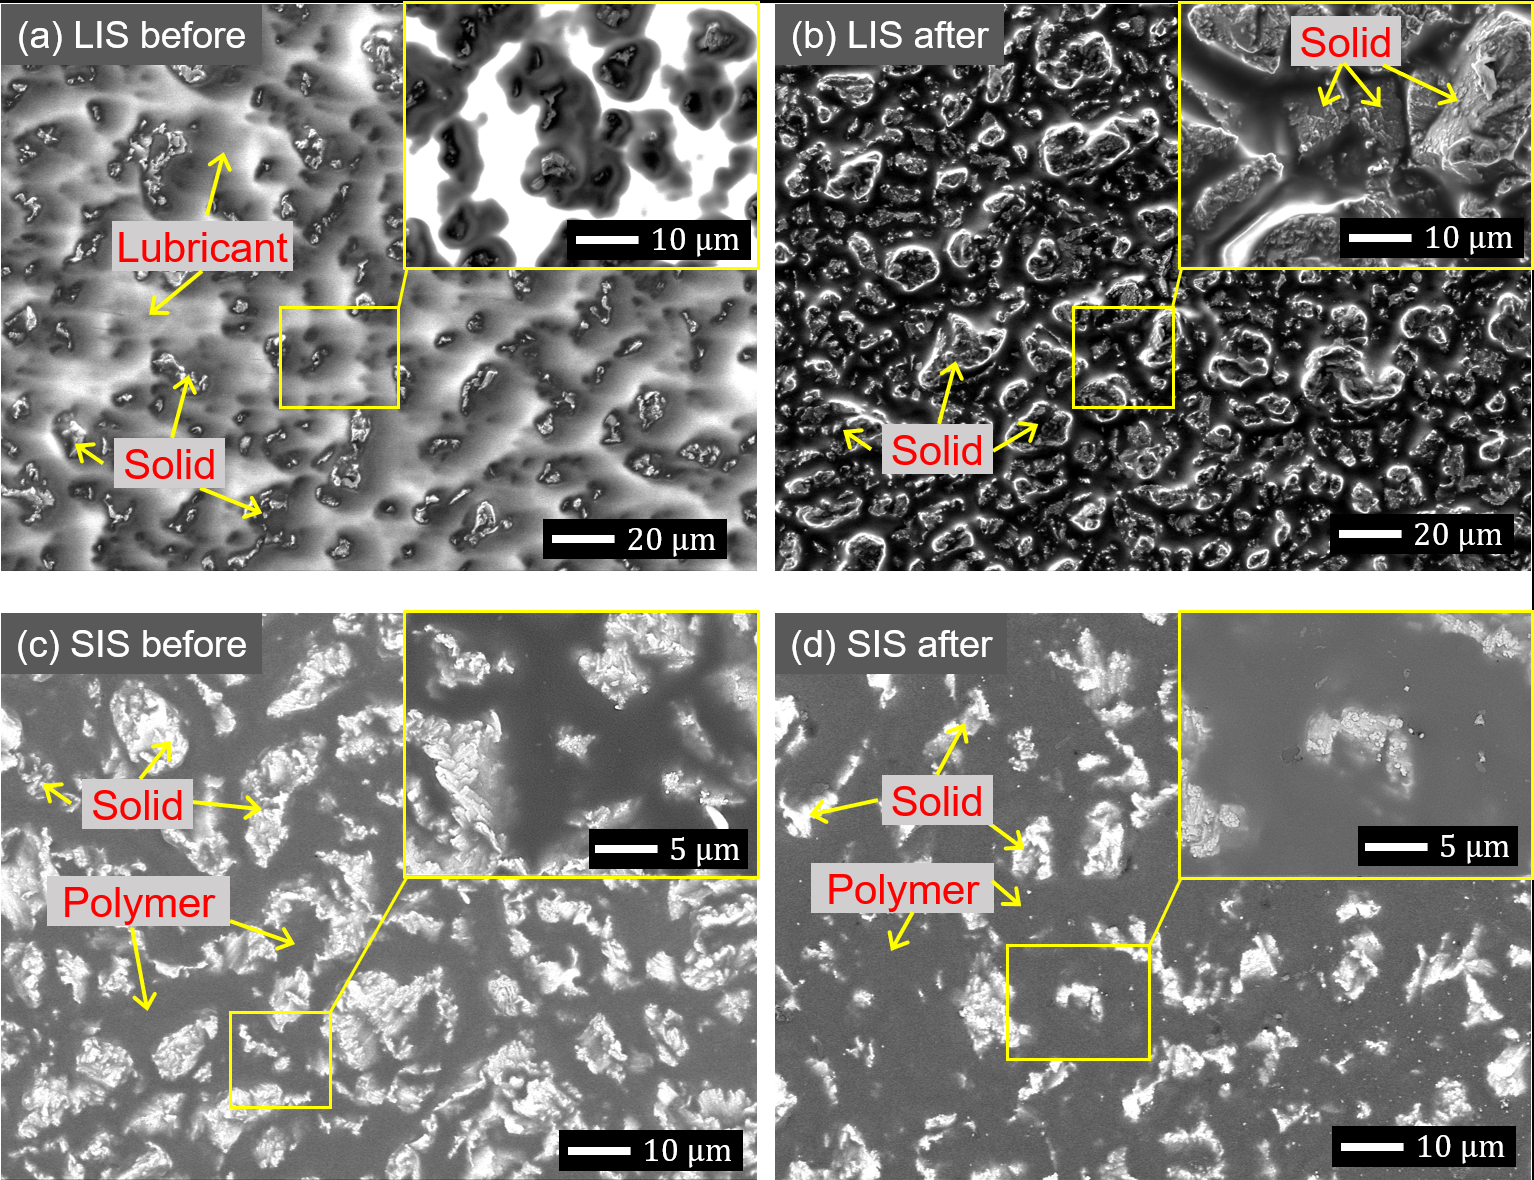 Scanning electron microscope images of (a)
before and (b) after-shear lubricant infused, and (c) before and (d)
after-shear solid-infused surfaces [Reproduced with permission from Hatte and Pitchumani (2022a)].